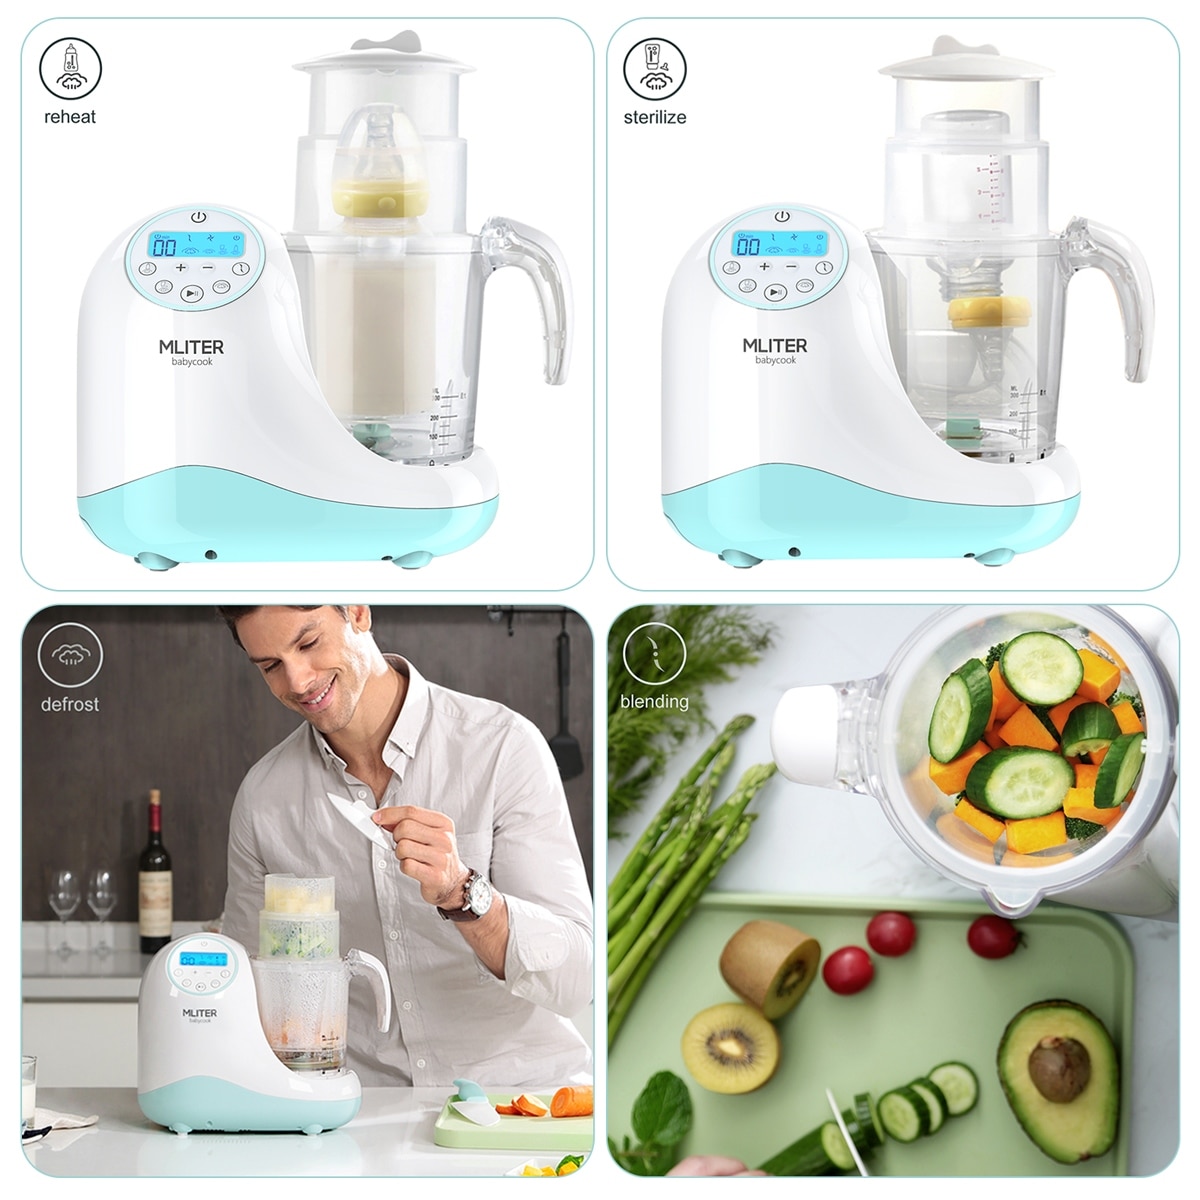 https://ak1.ostkcdn.com/images/products/is/images/direct/2ce348d10ab3dfdf676af05f91b9b24373d5d50f/Mliter-Babycook-5-in-1-Baby-Food-Processor%2C-Steam-Cooker%2C-With-Blending%2C-Mixing-%26-Chopping%2C-Sterilizing-and-Warming-%26-Reheating.jpg